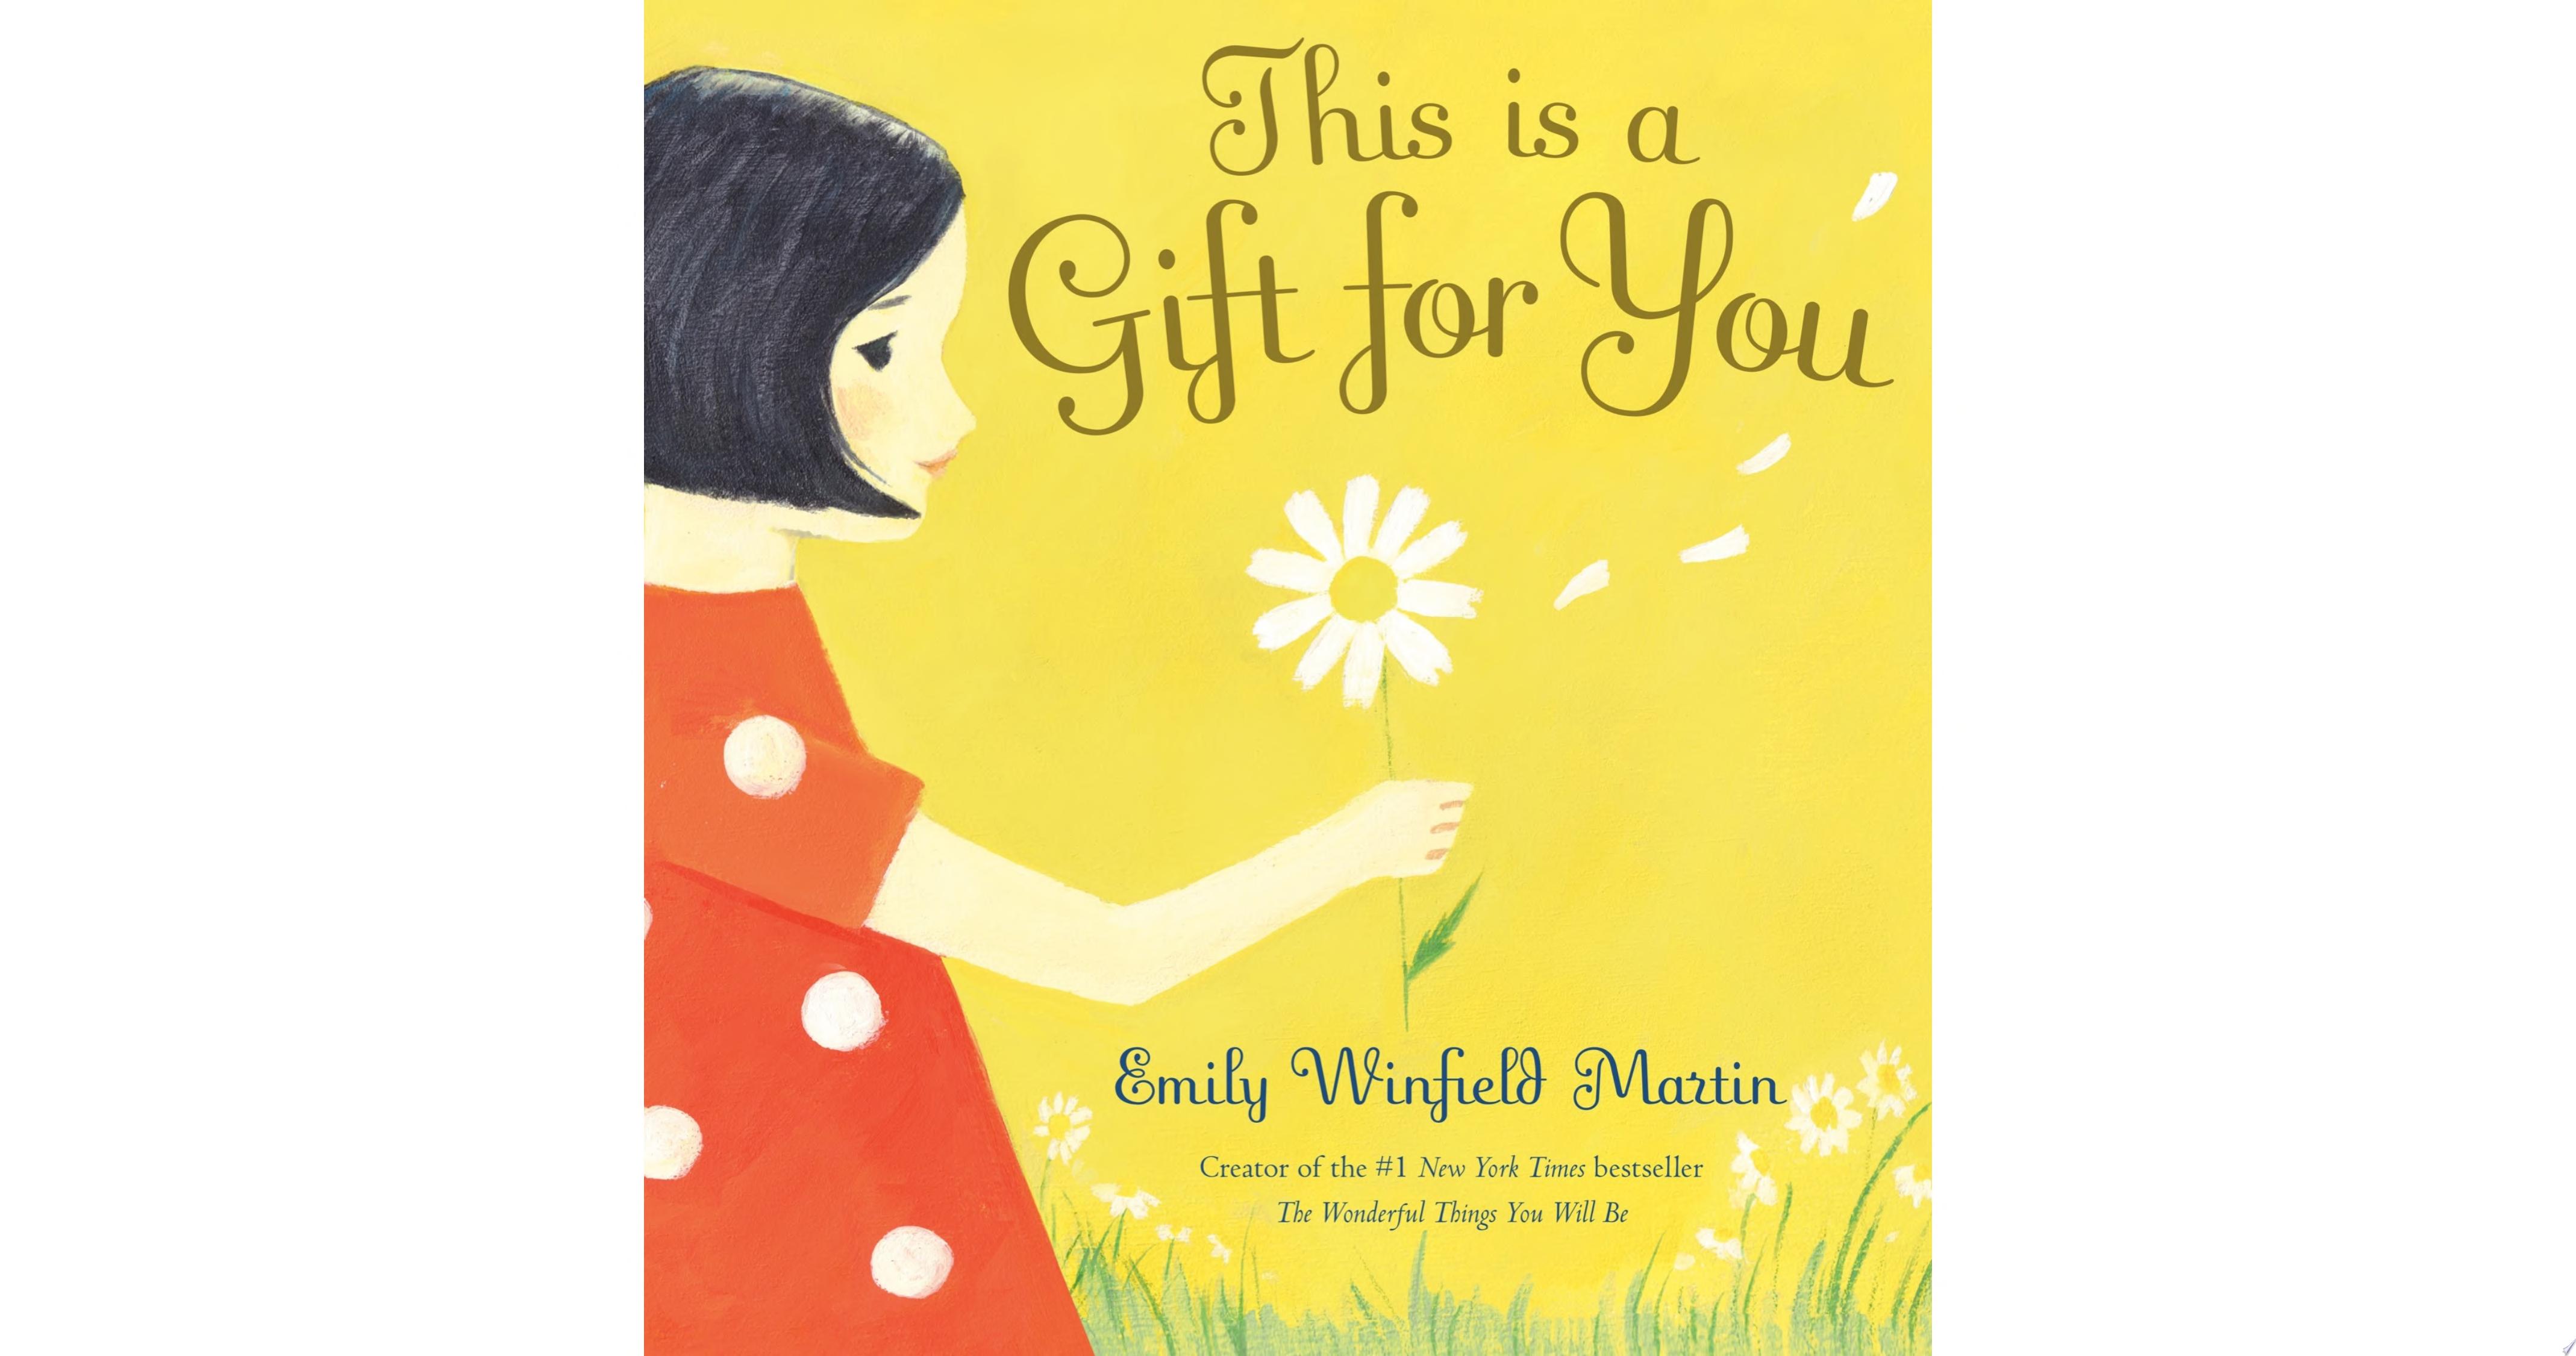 Image for "This Is a Gift for You"